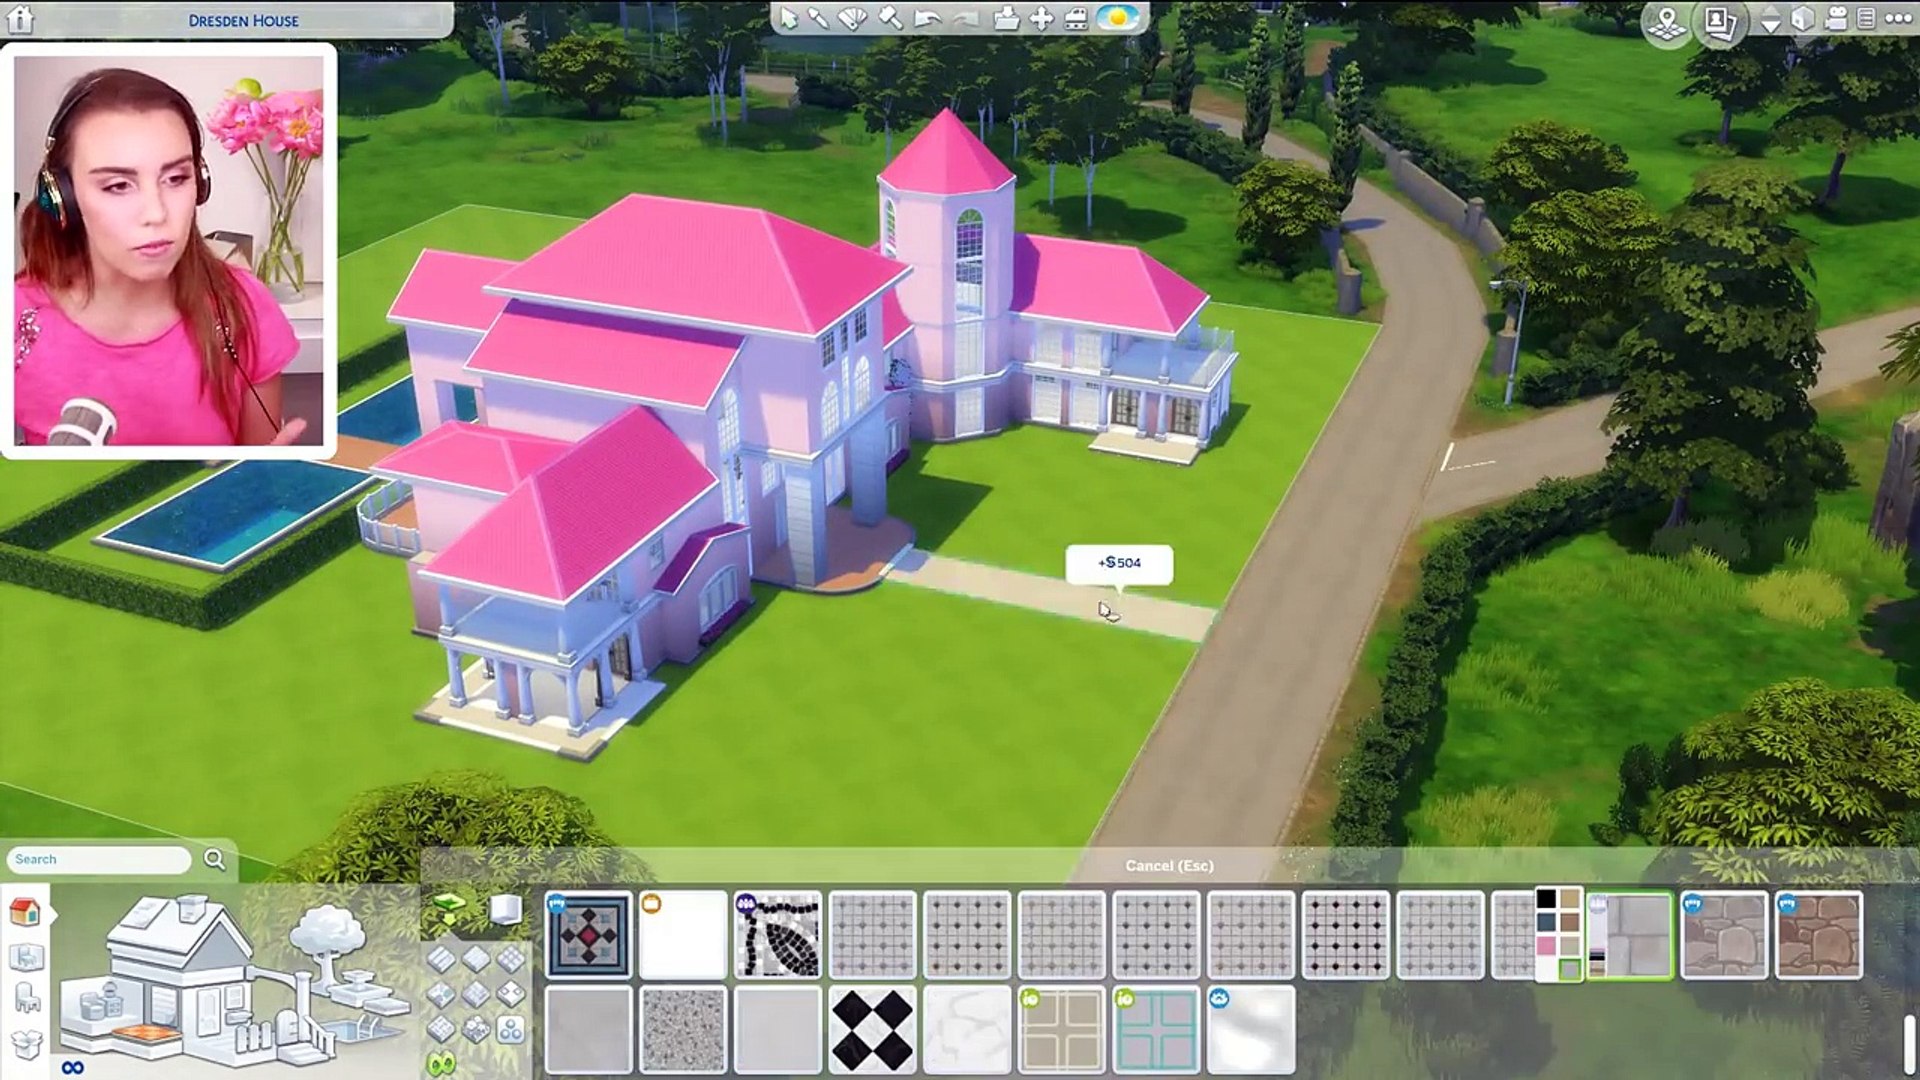 Higgins Styring Bære BARBIE LIFE IN THE DREAMHOUSE! [ The Sims 4 Build ] - Dailymotion Video